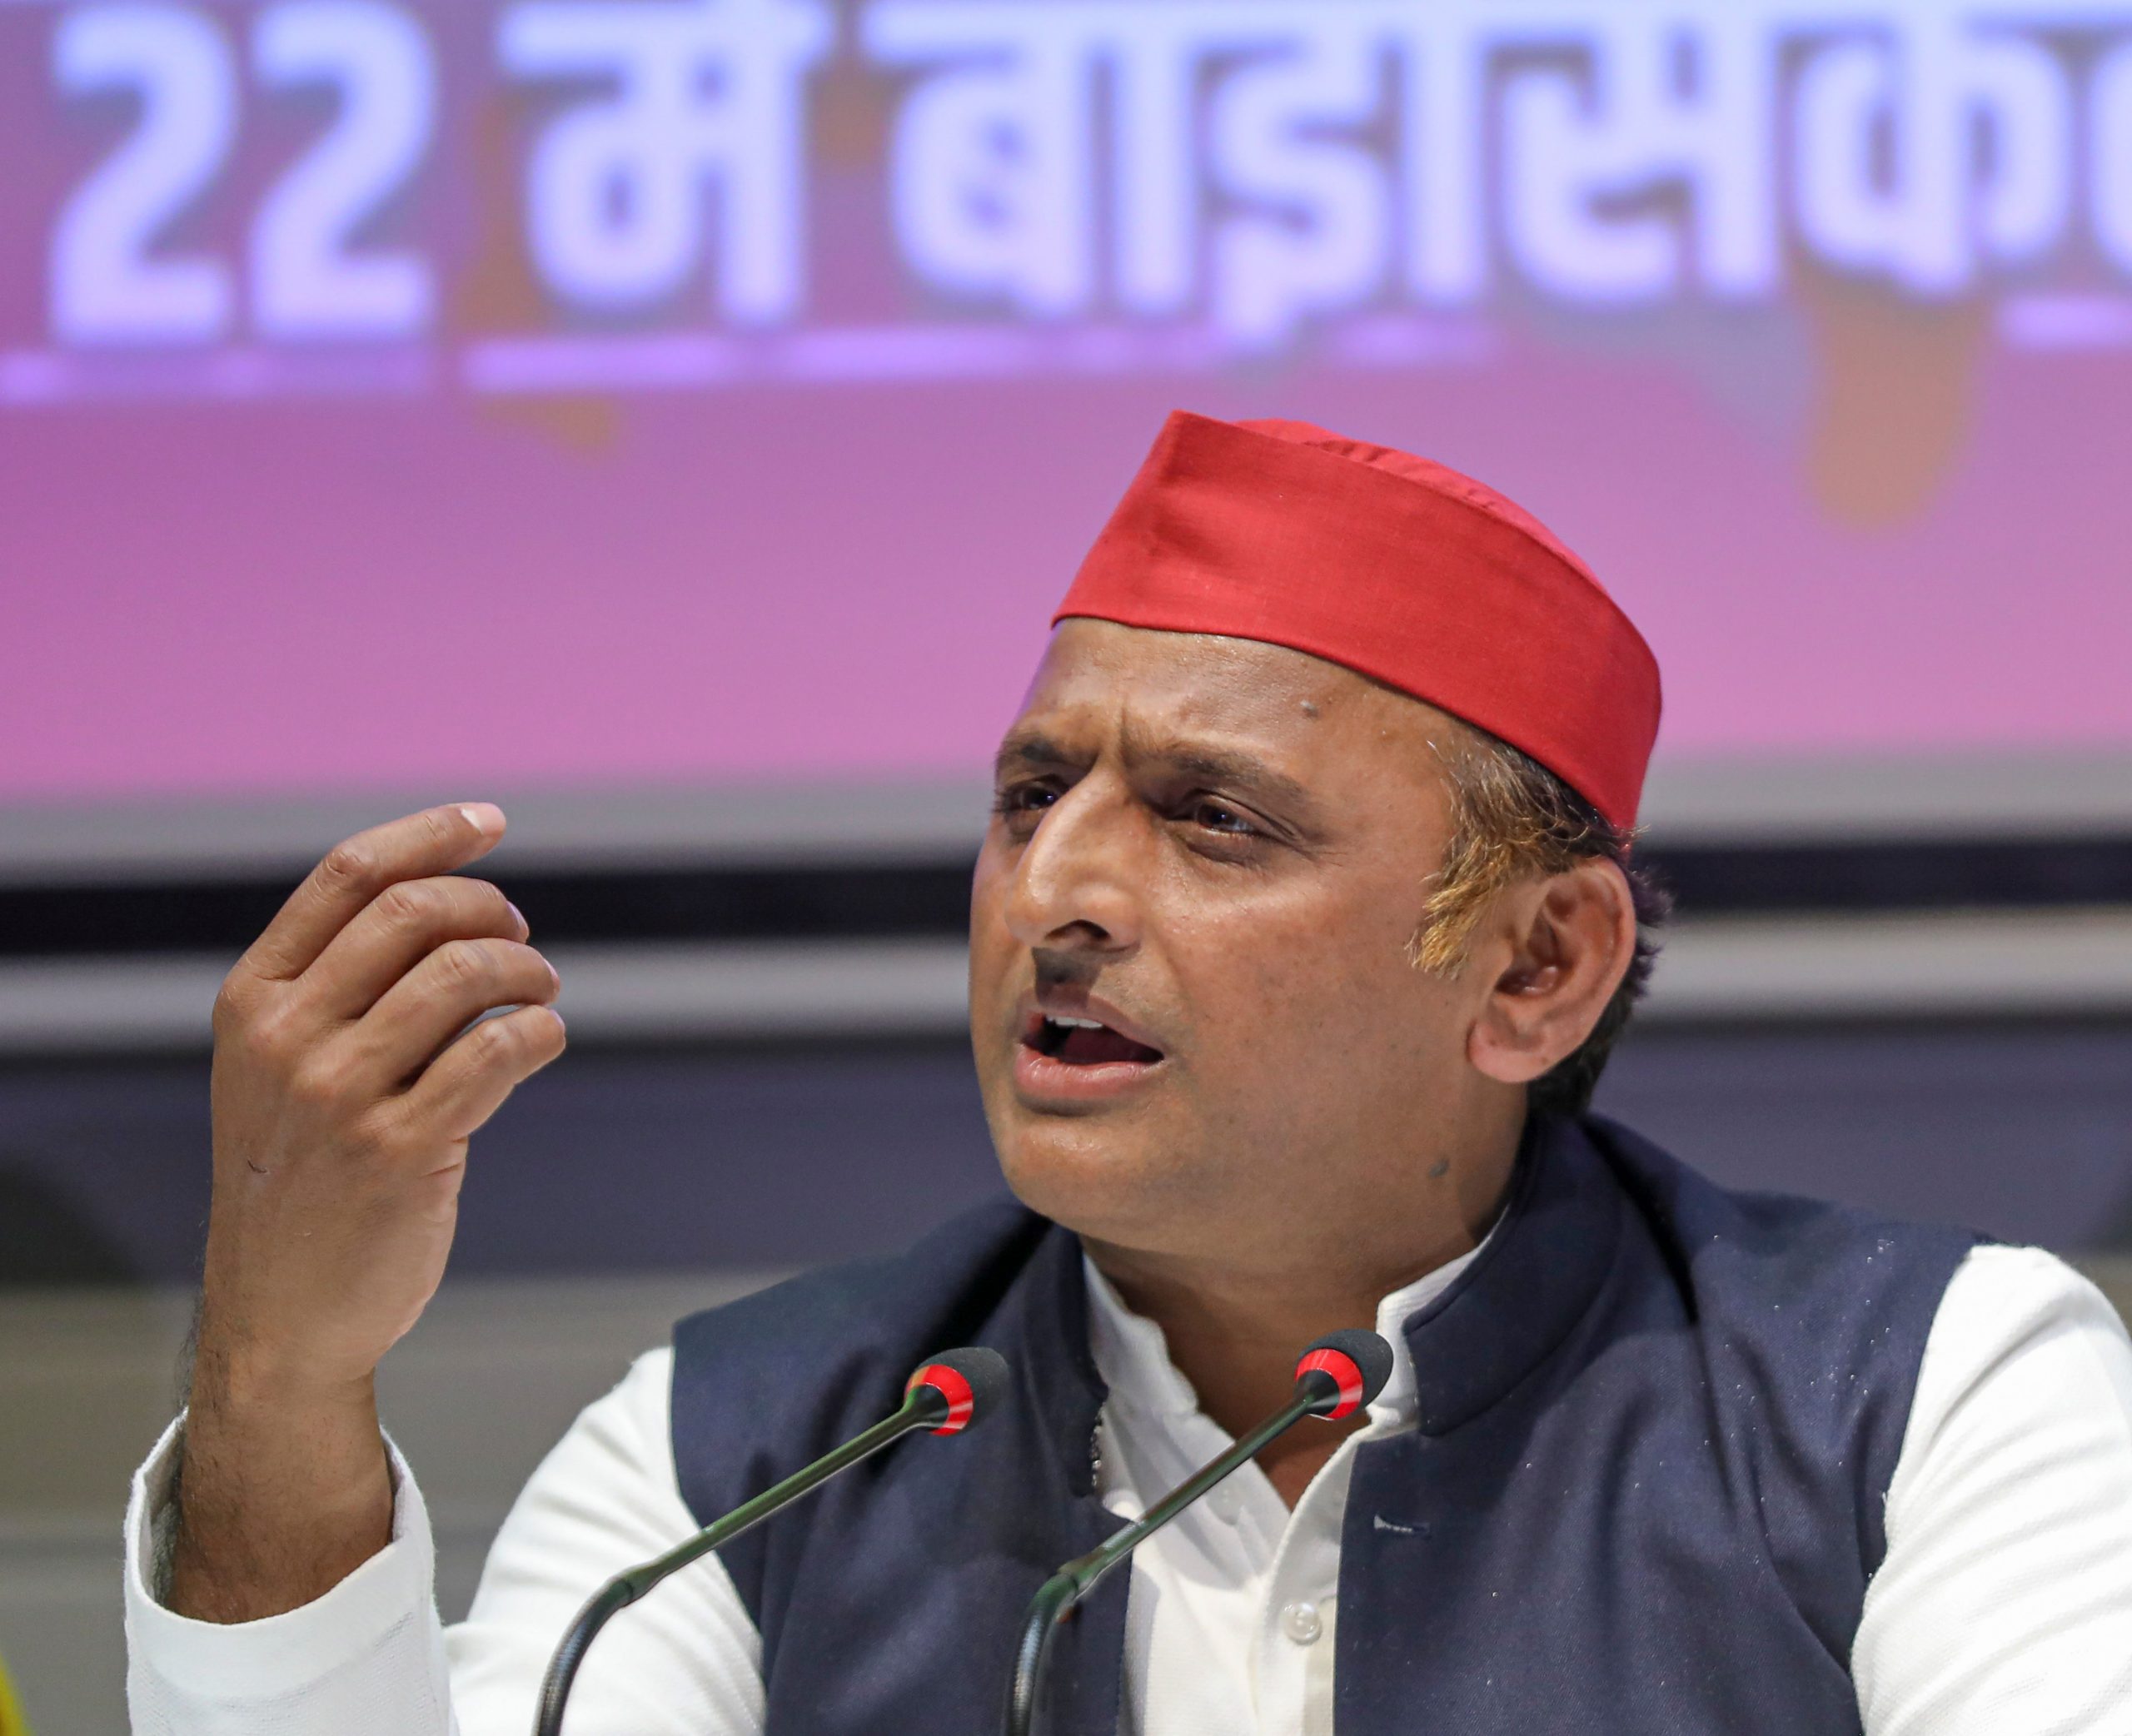 In UP drubbing, Akhilesh Yadav sees a silver lining